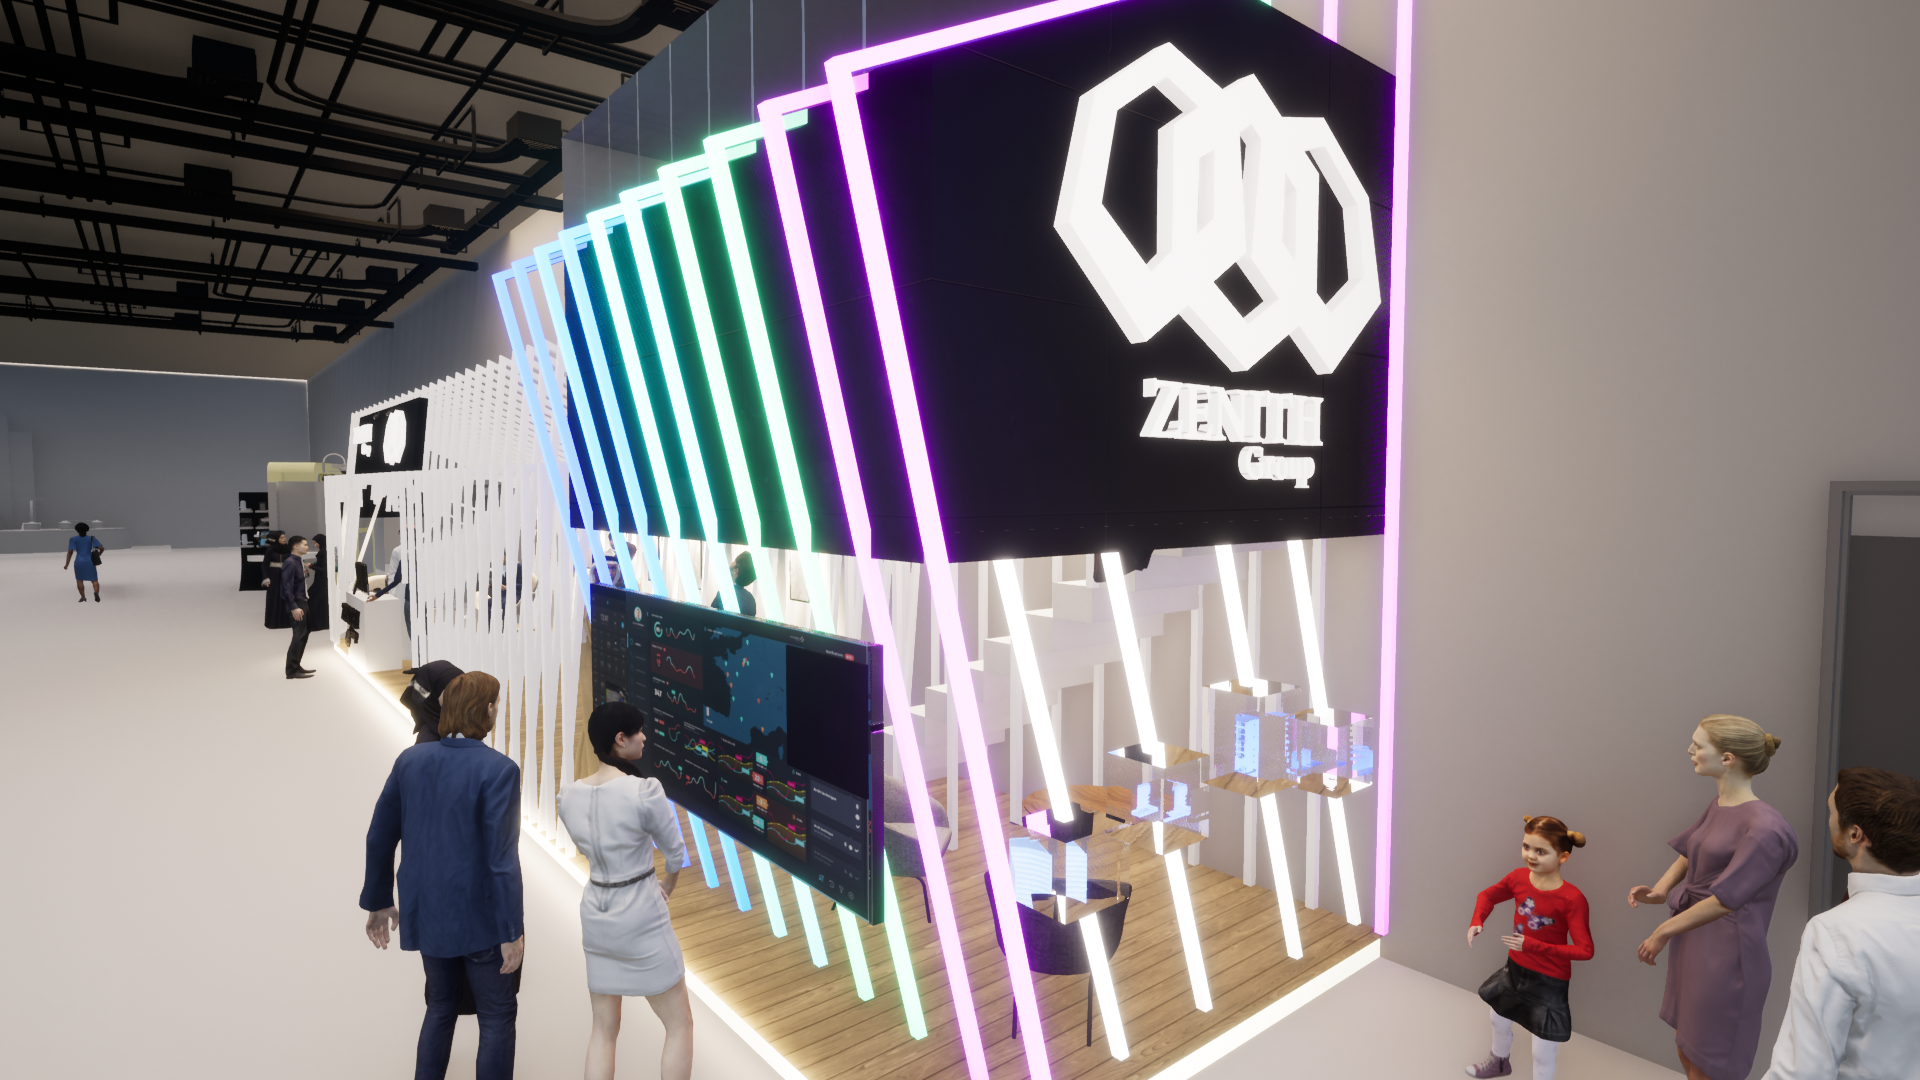 ZENITH Group Stand-Soodeh Abedini-Render (09)